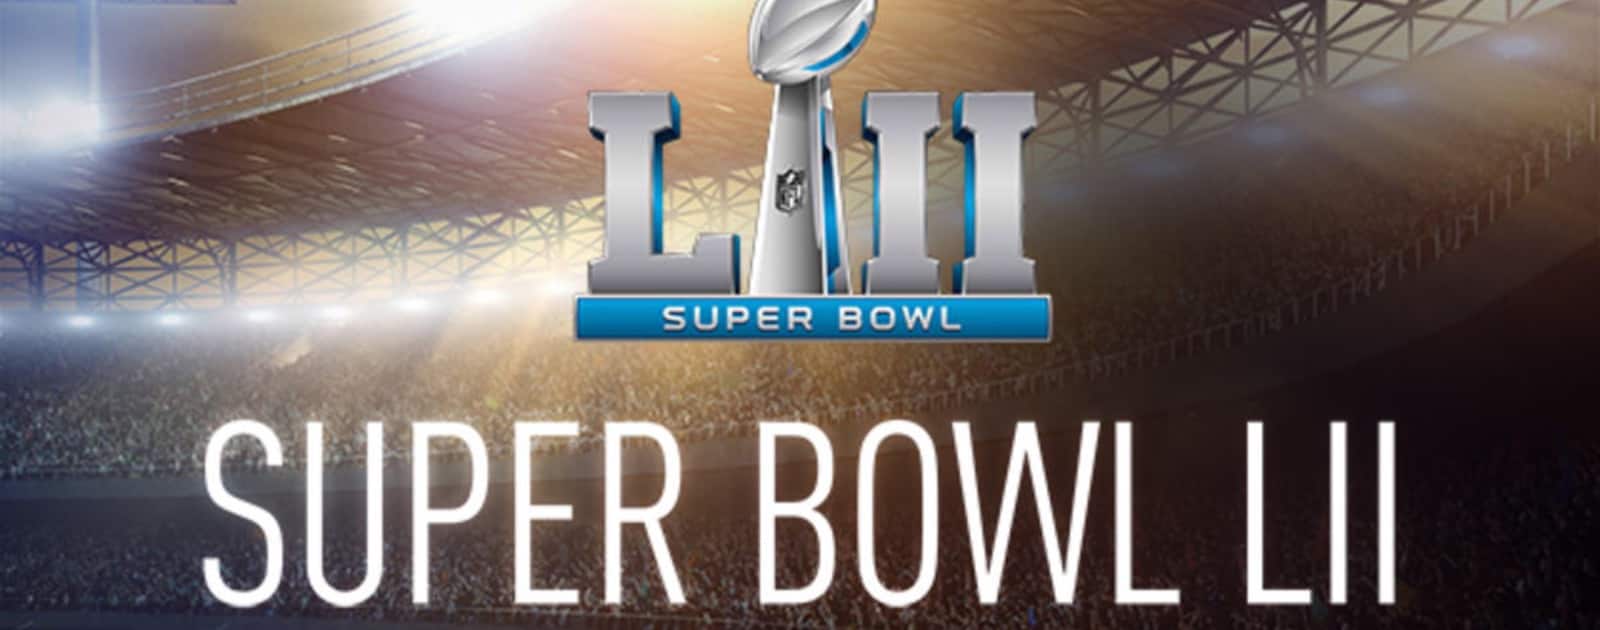 How to Watch Super Bowl LII On Your Apple Devices